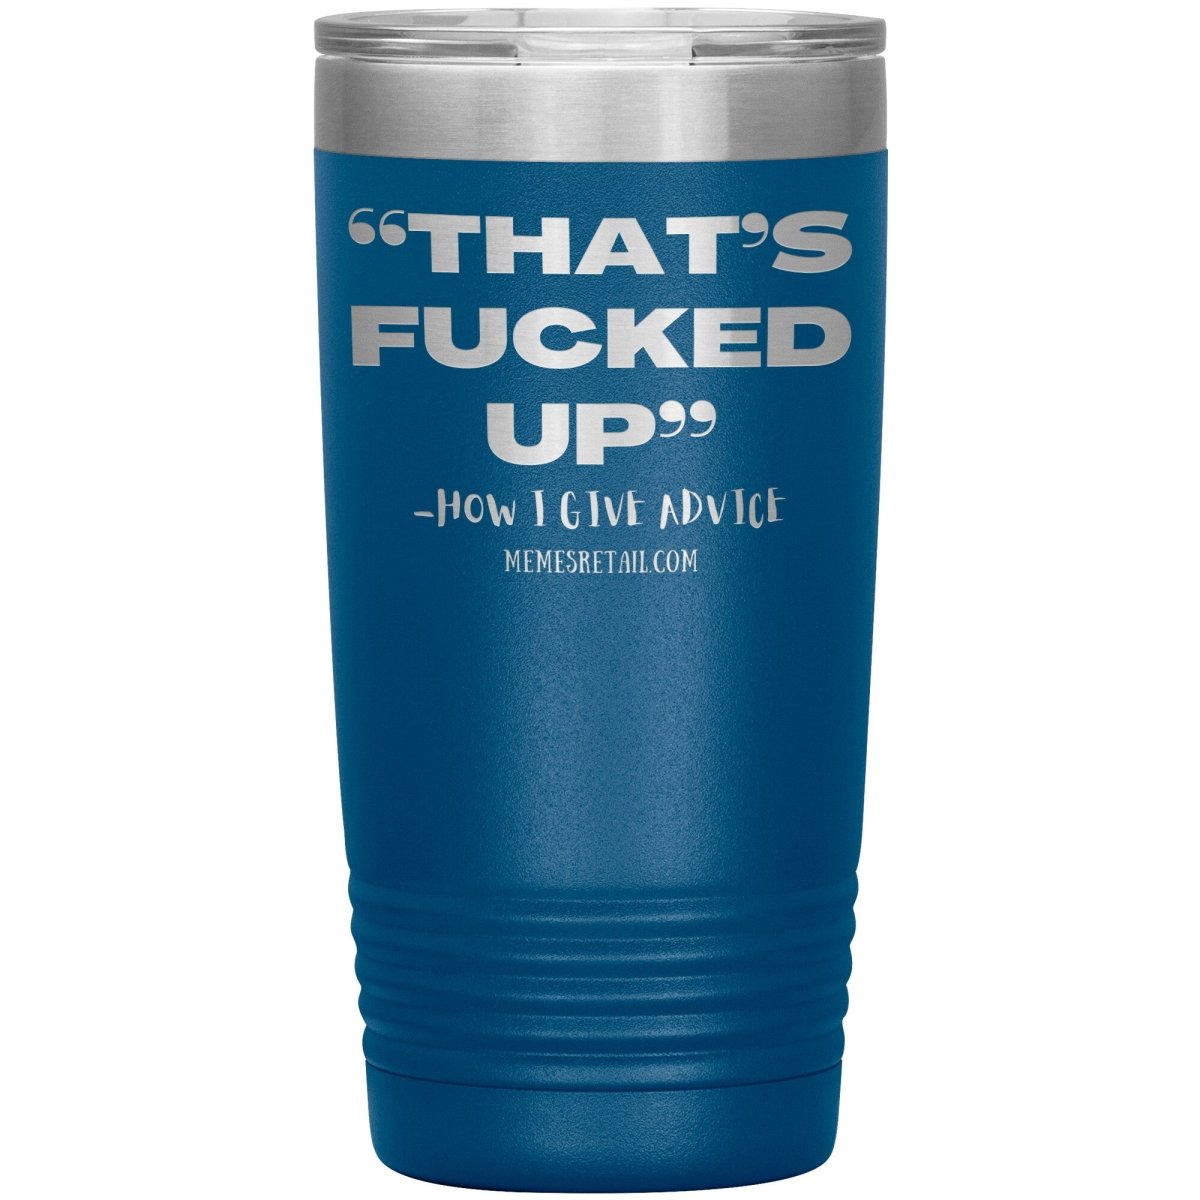 “That’s Fucked Up” -how I give advice Tumblers, 20oz Insulated Tumbler / Blue - MemesRetail.com